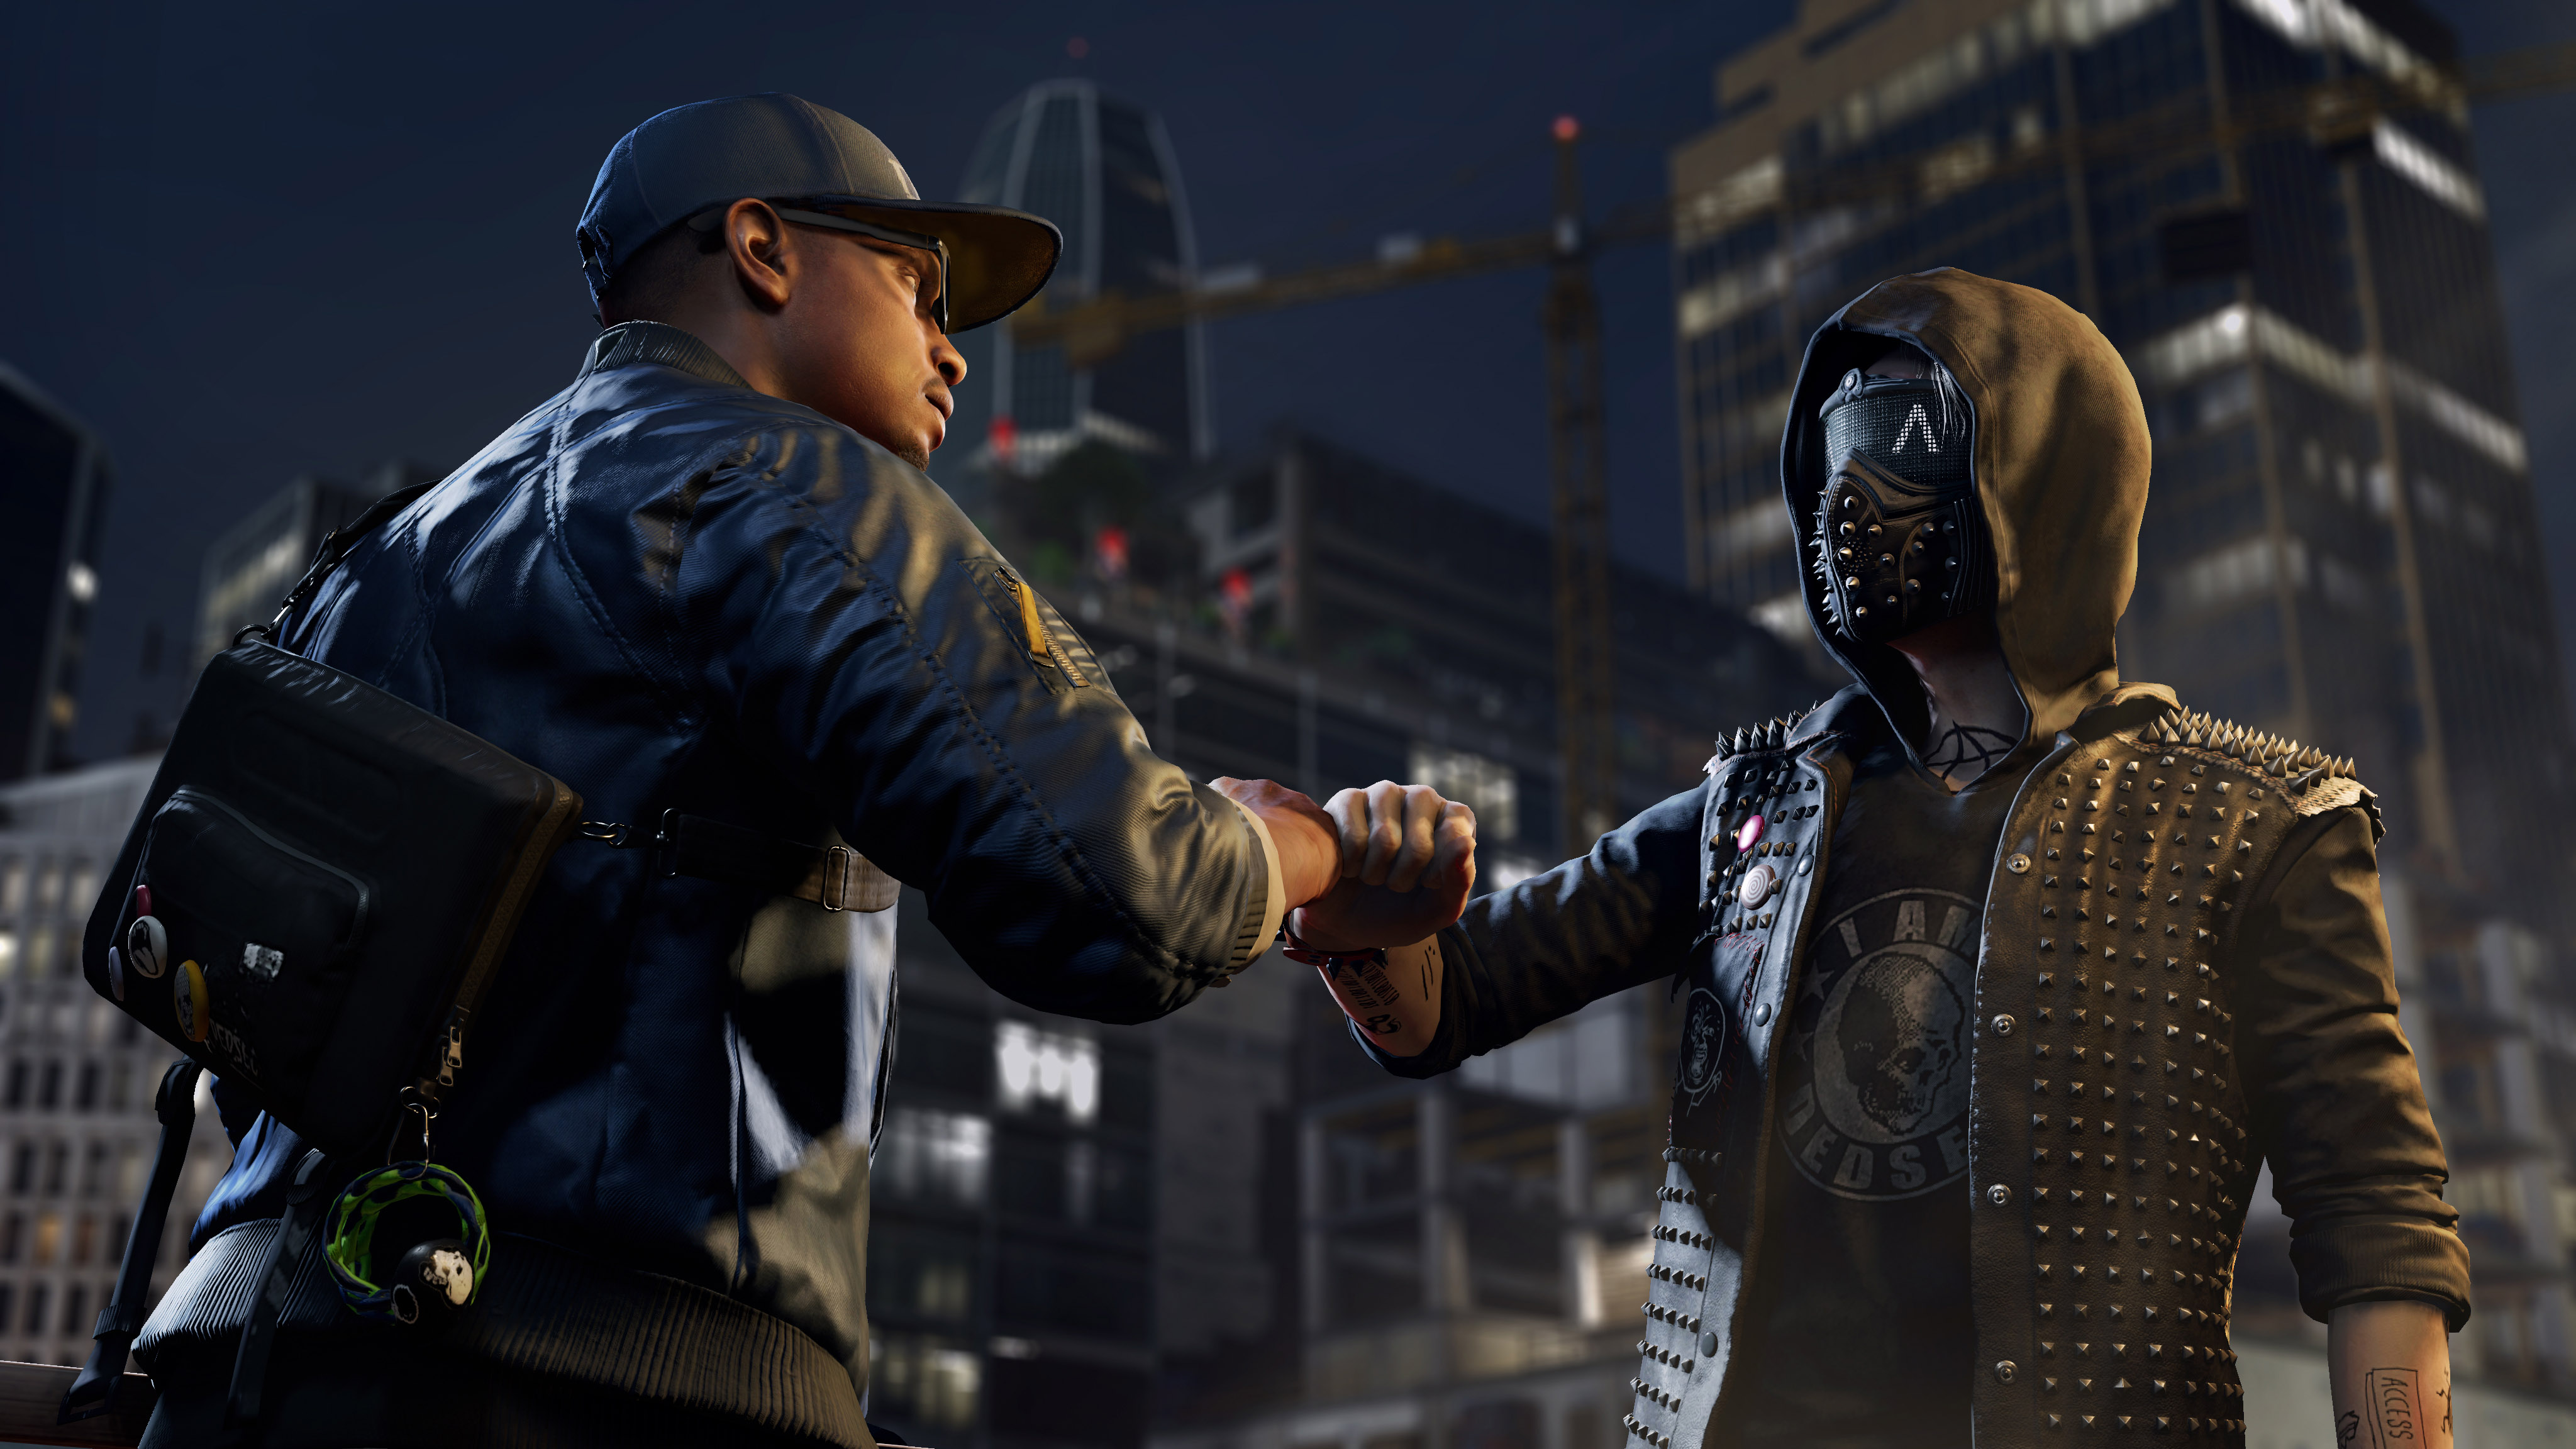 watch dogs 2 wallpaper,action adventure game,pc game,fictional character,screenshot,games